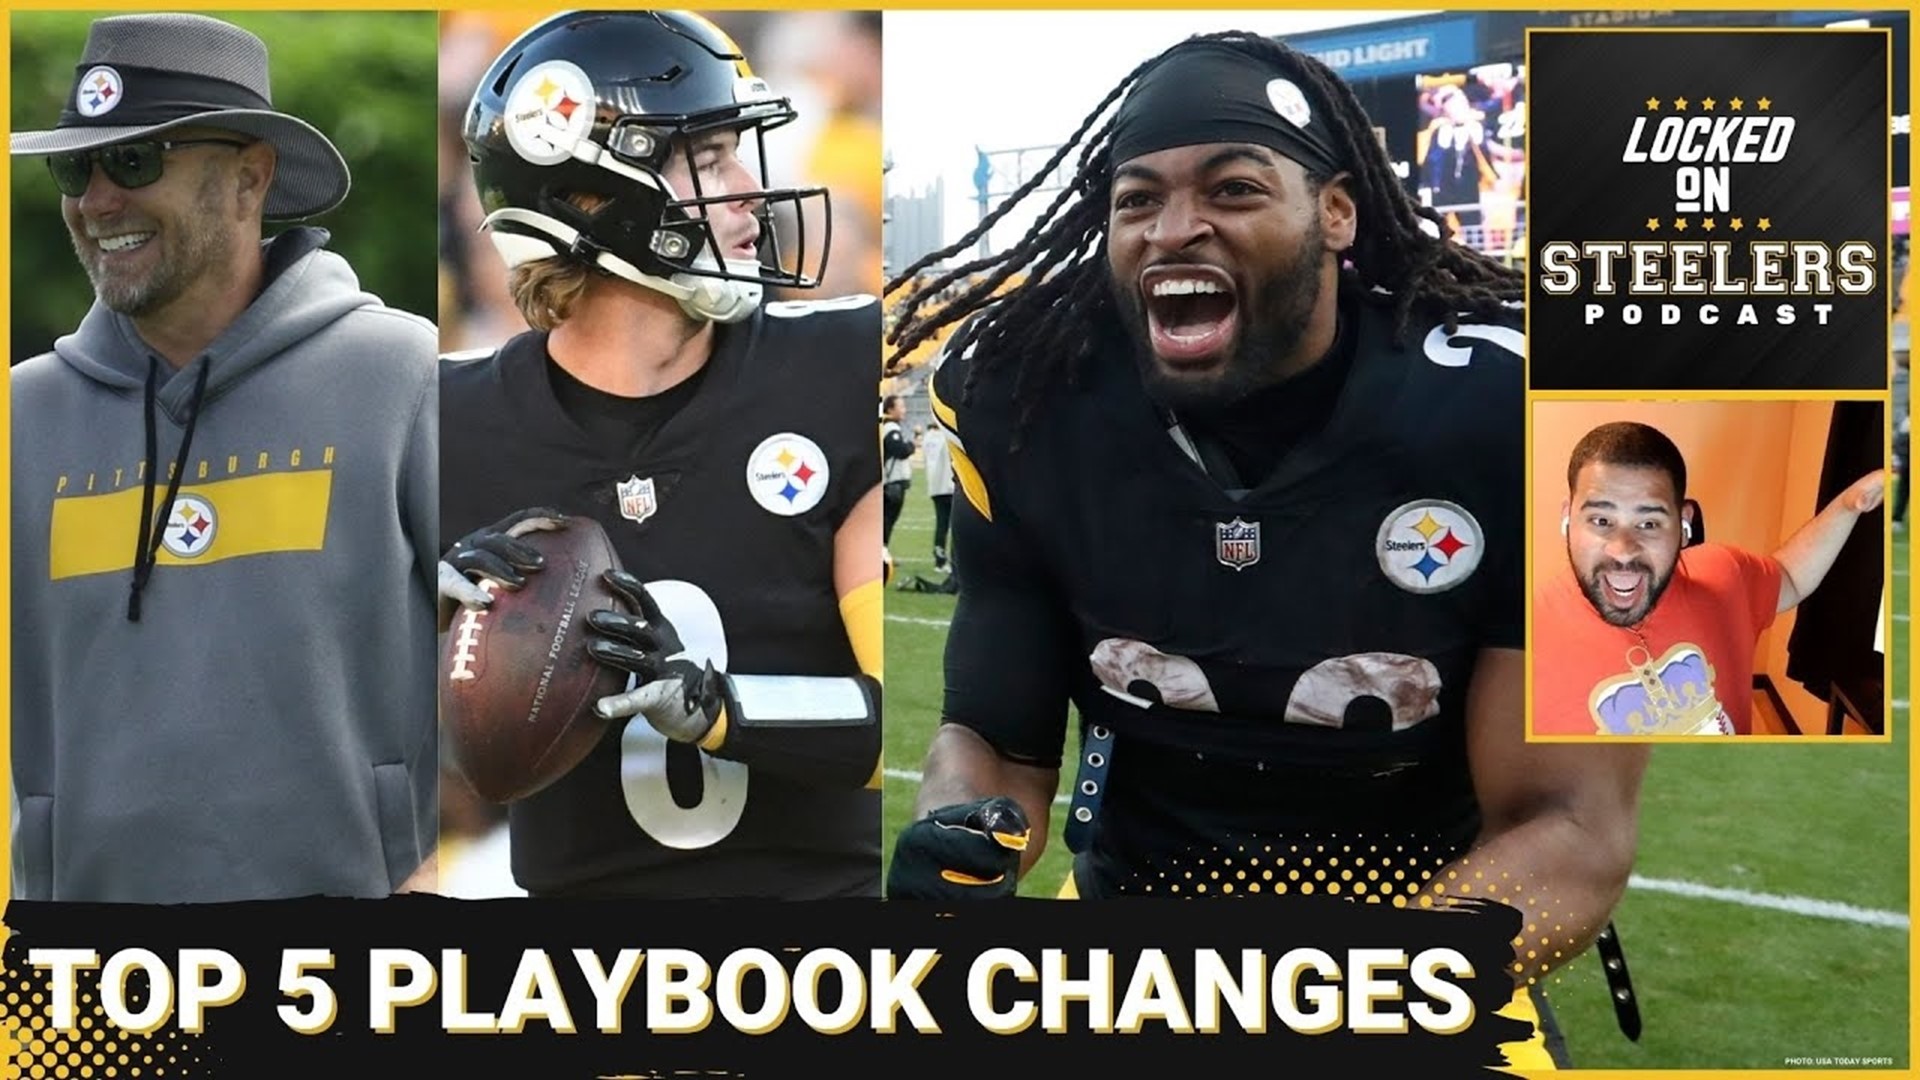 The Pittsburgh Steelers quarterback, Kenny Pickett, had his car and playbook stolen by Christopher Carter last week.